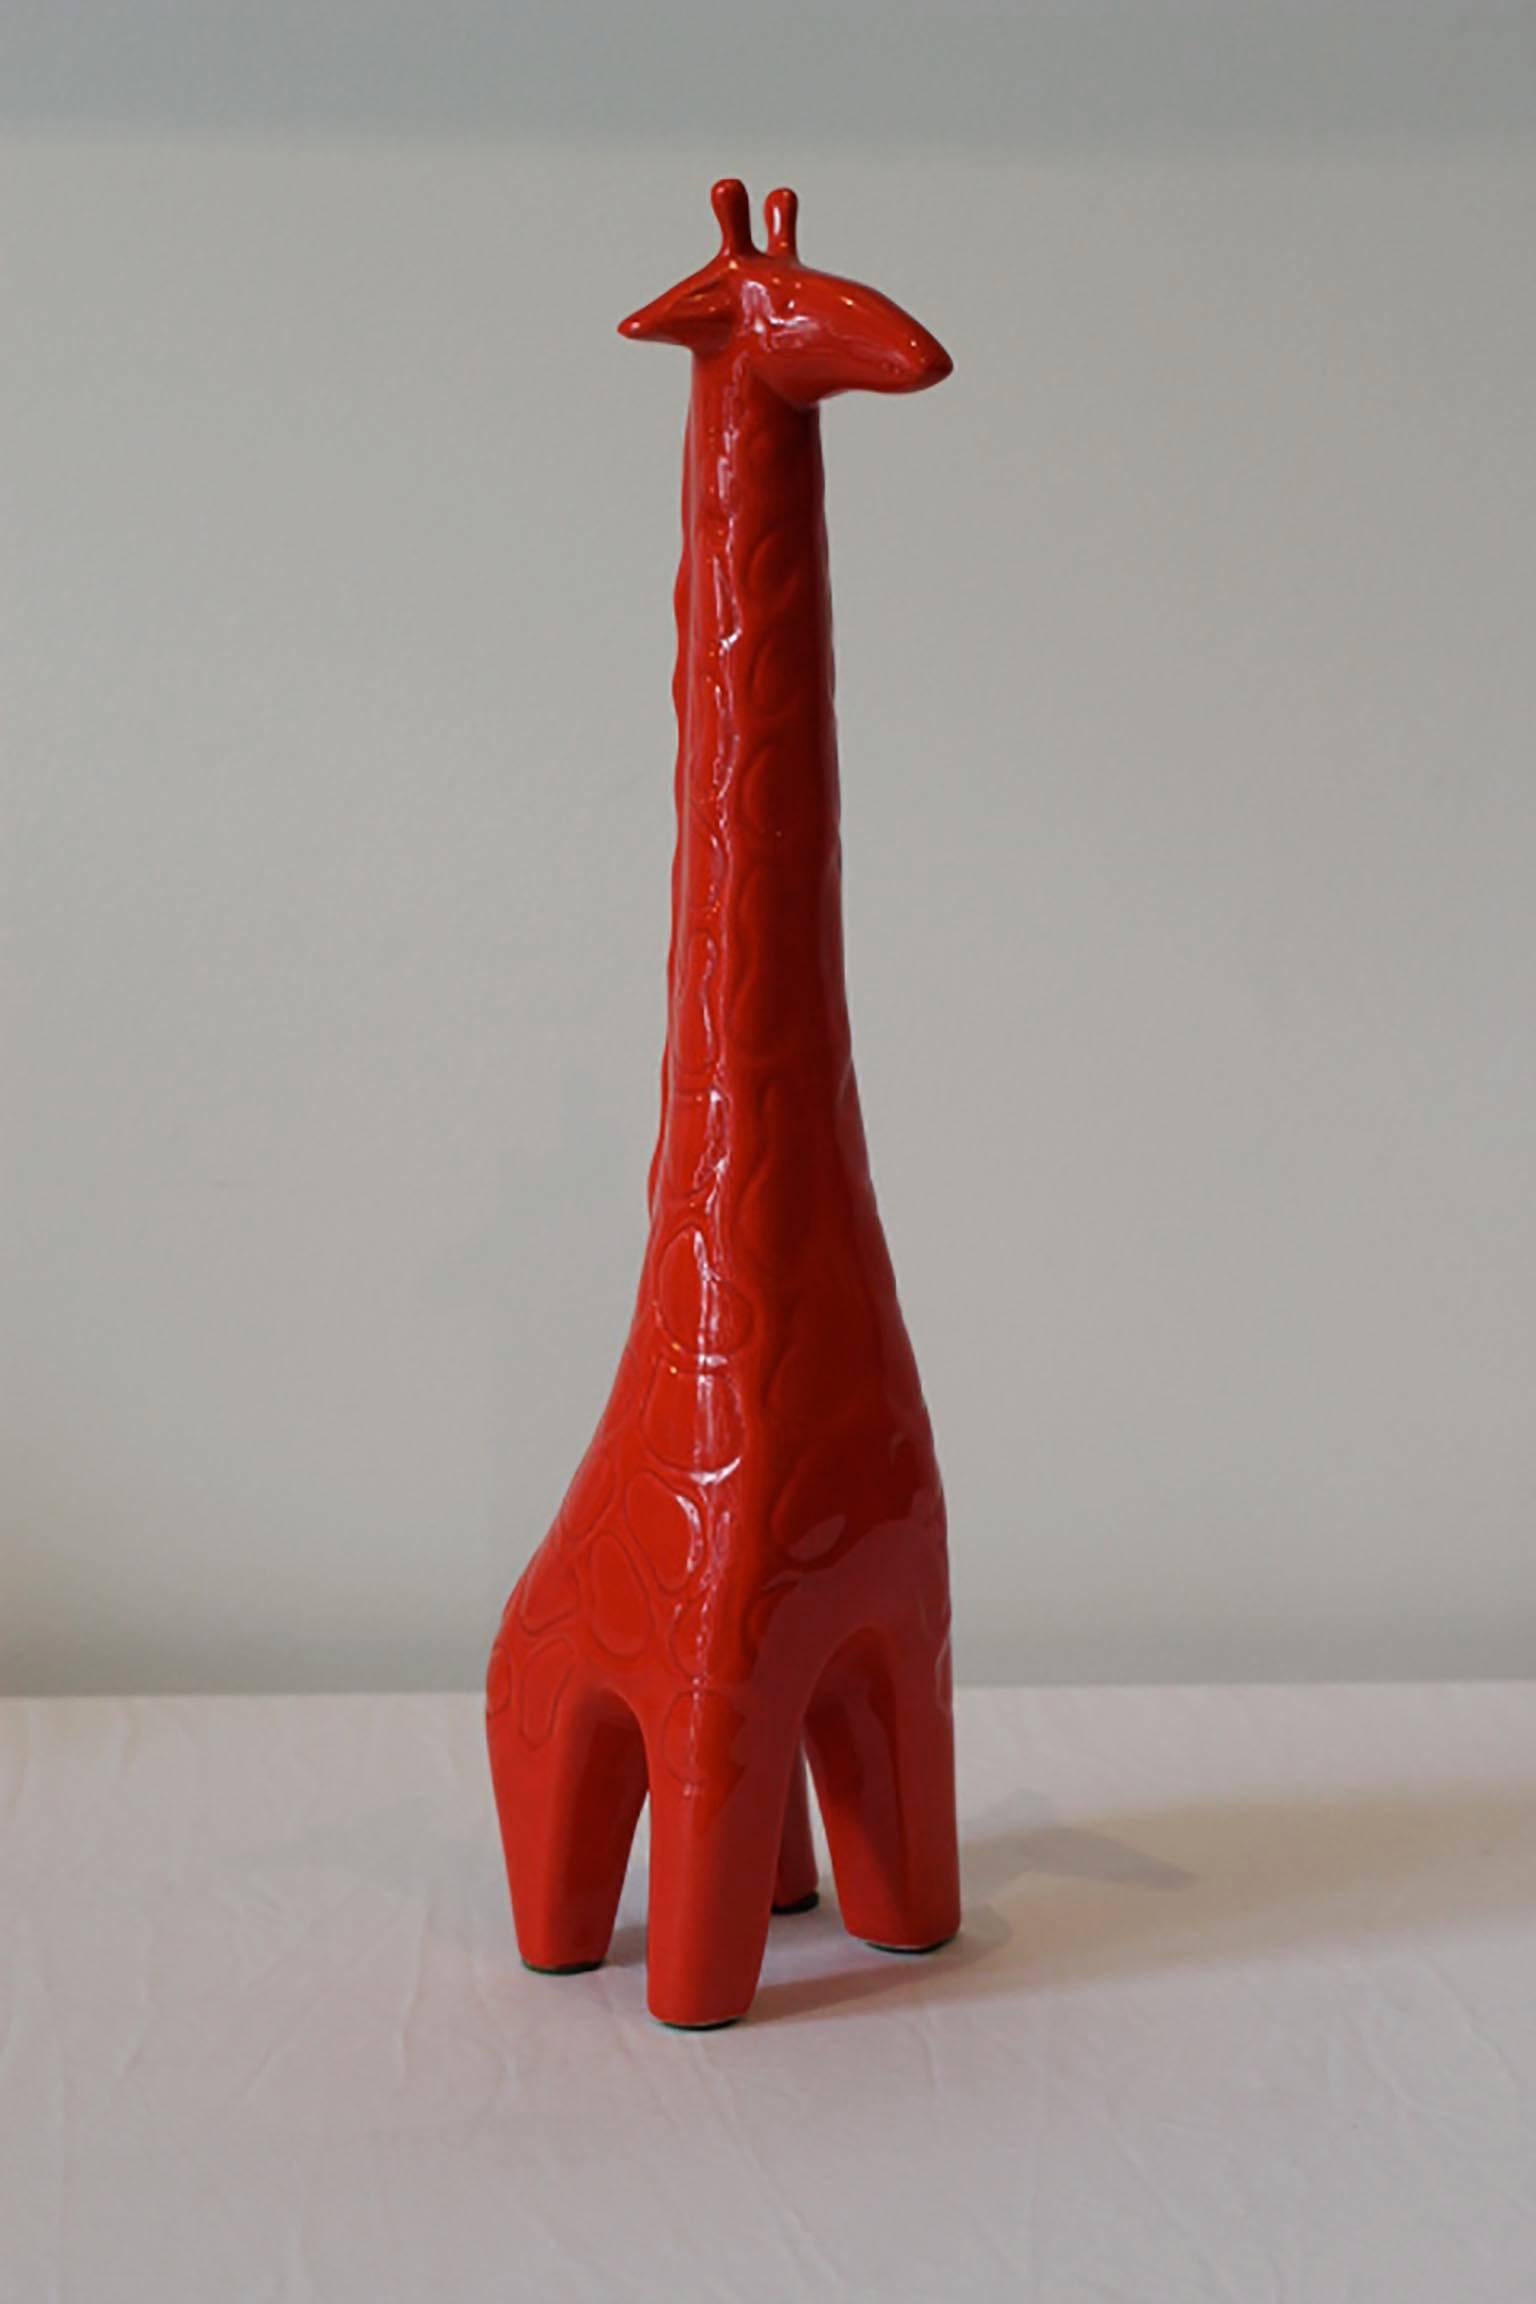 Mid-Century red glazed ceramic giraffe by Jaru Art Products, a California Pottery company that produced from the 1950s until the 1980s. Based on the original price tag, this piece appears to be from the 1950-1960s.